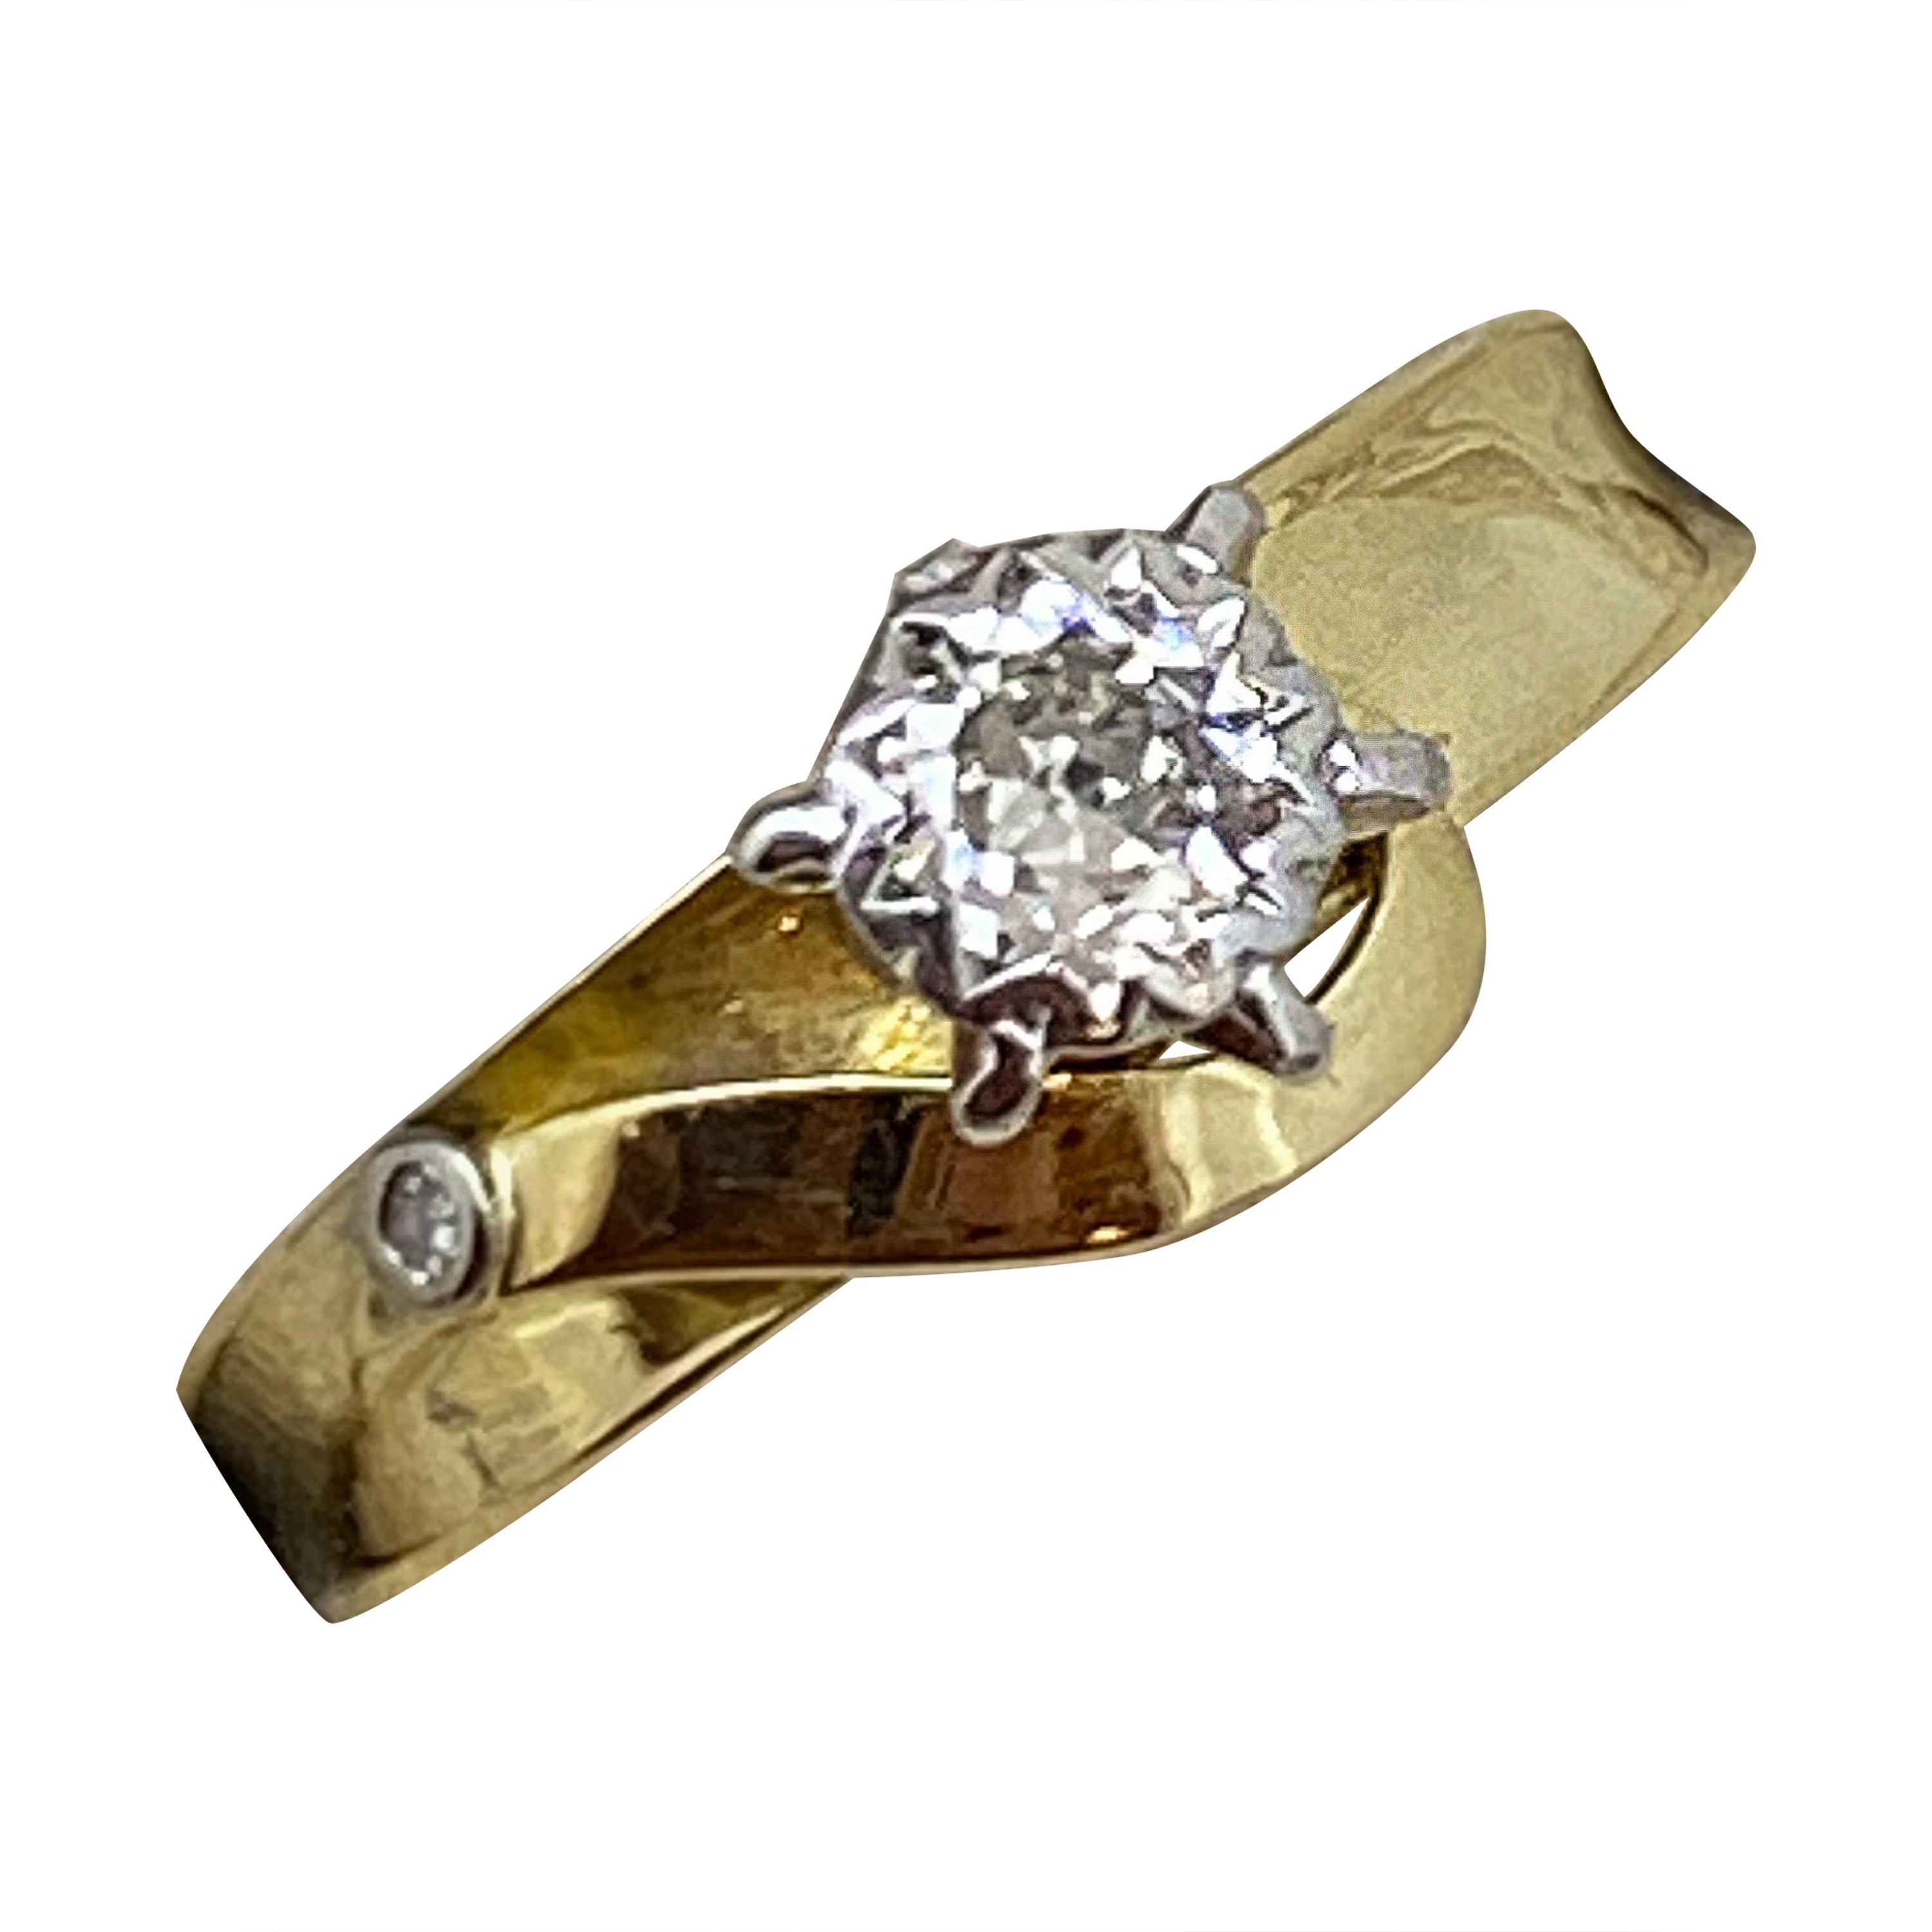 Retro 0.30ct Old-European Cut Diamond Solitaire with Accents Ring in 18K/Plat. For Sale